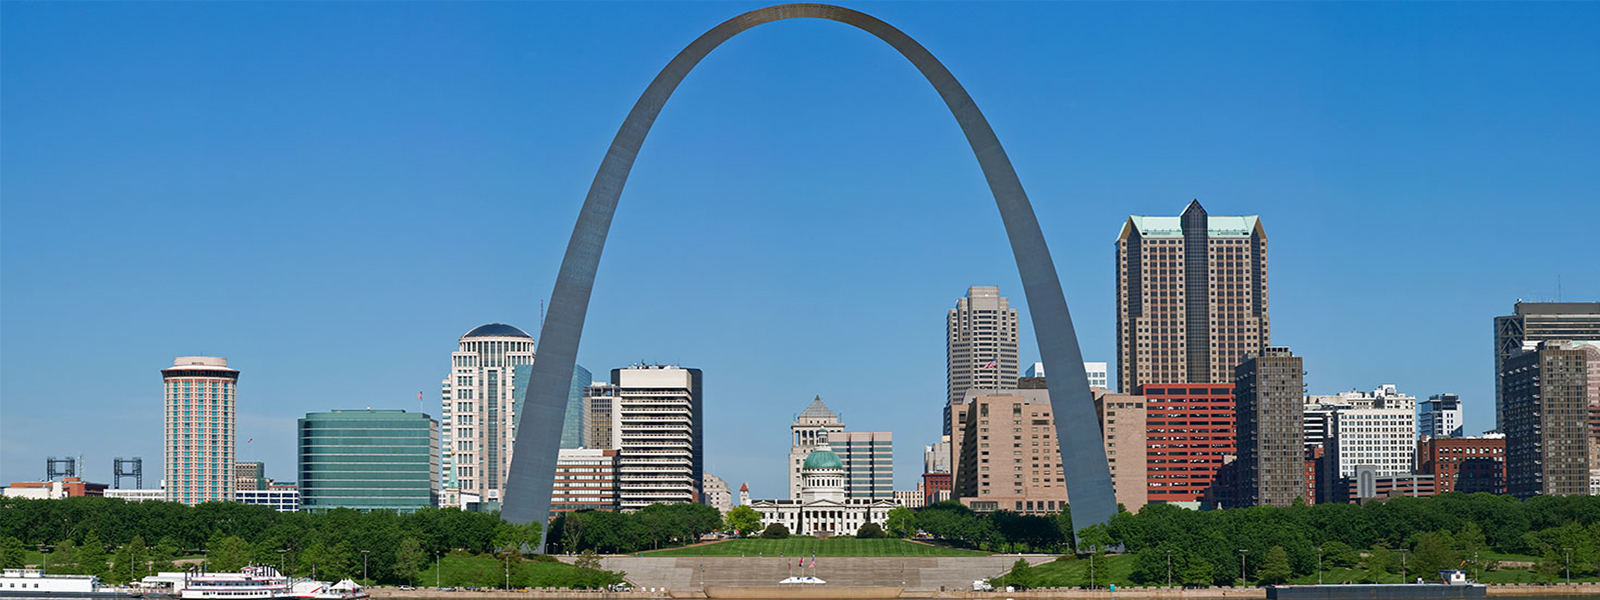 Cheap Flights to St- Louis from $105 in 2020